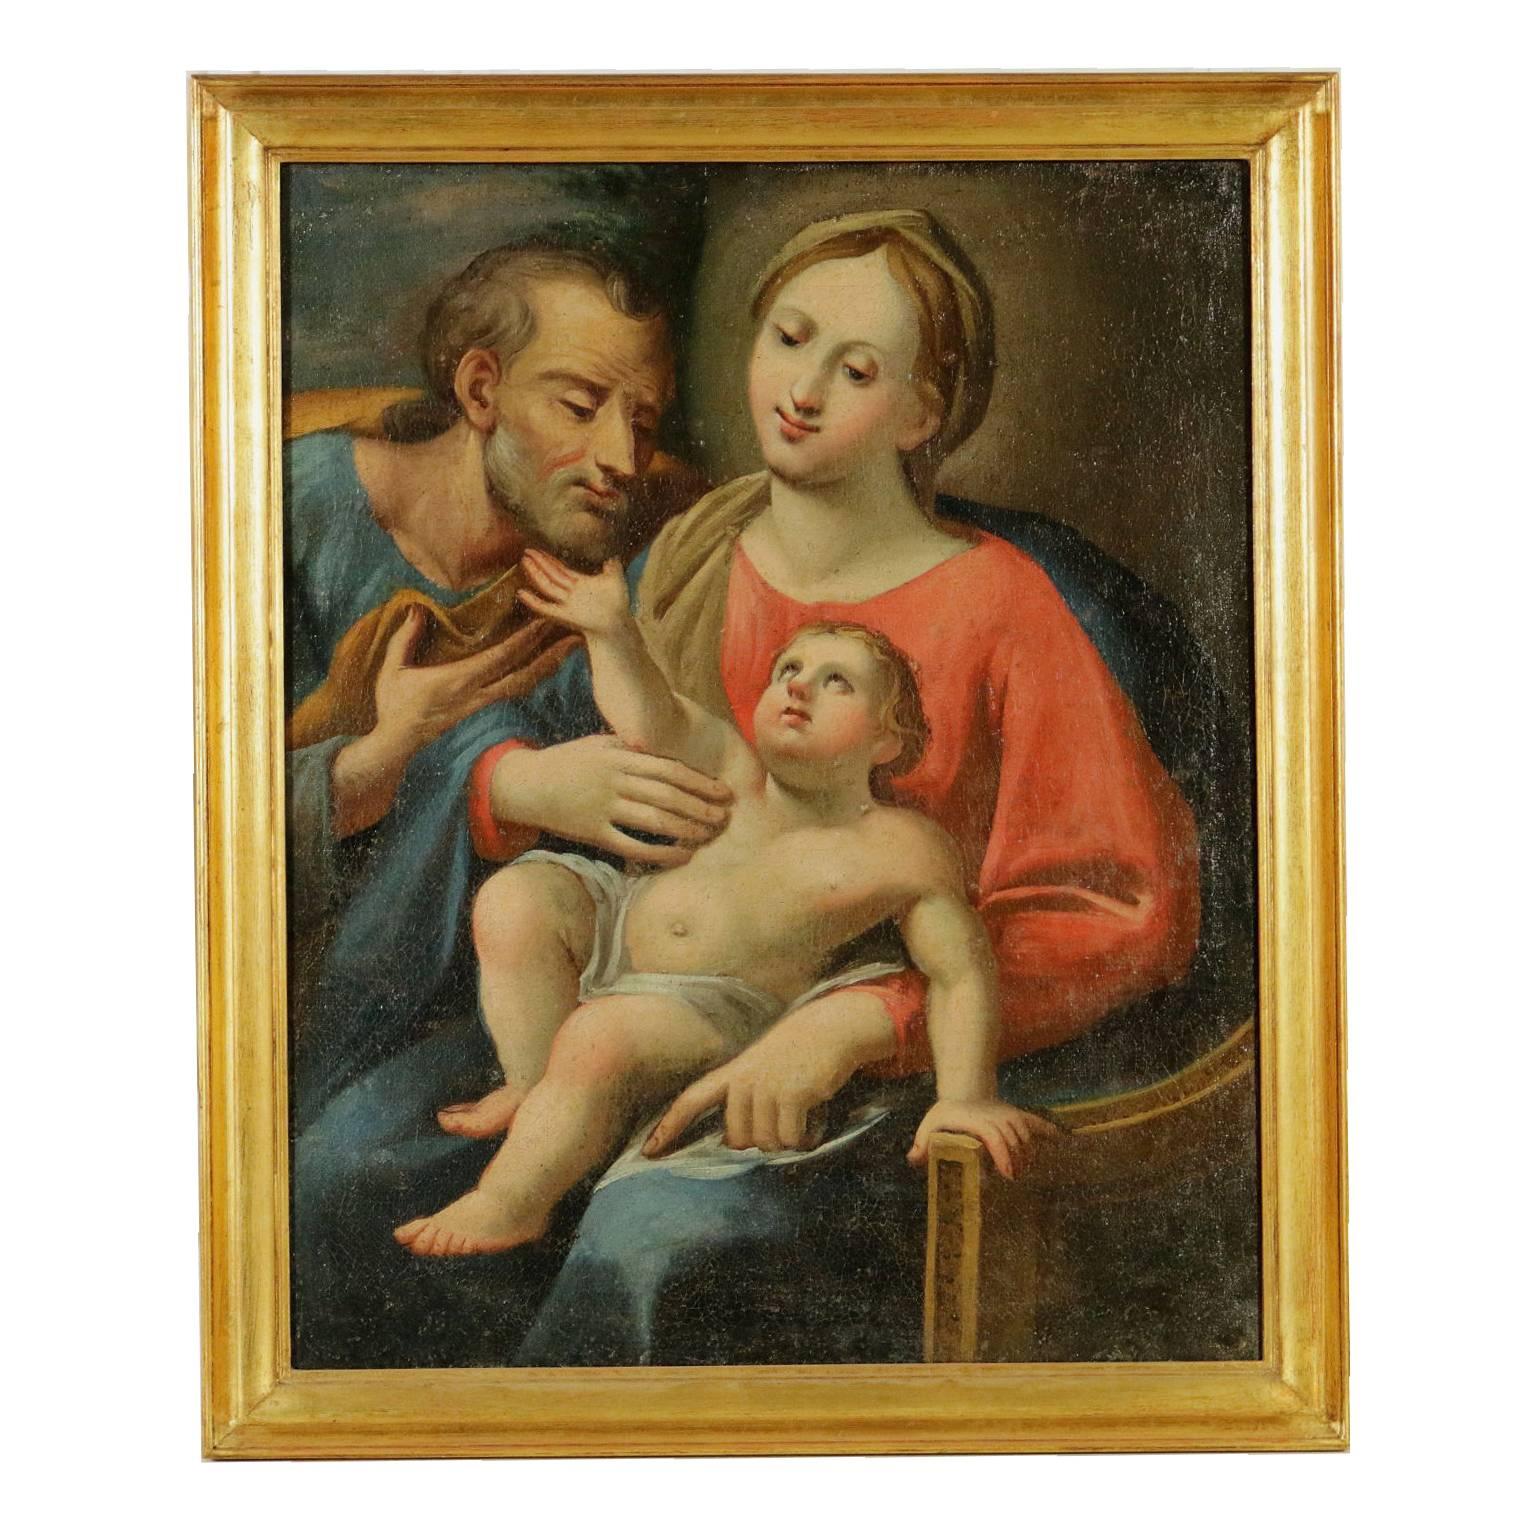 Unknown Portrait Painting - Madonna with Child and St. Joseph Italian School Oil on Canvas 18th Century